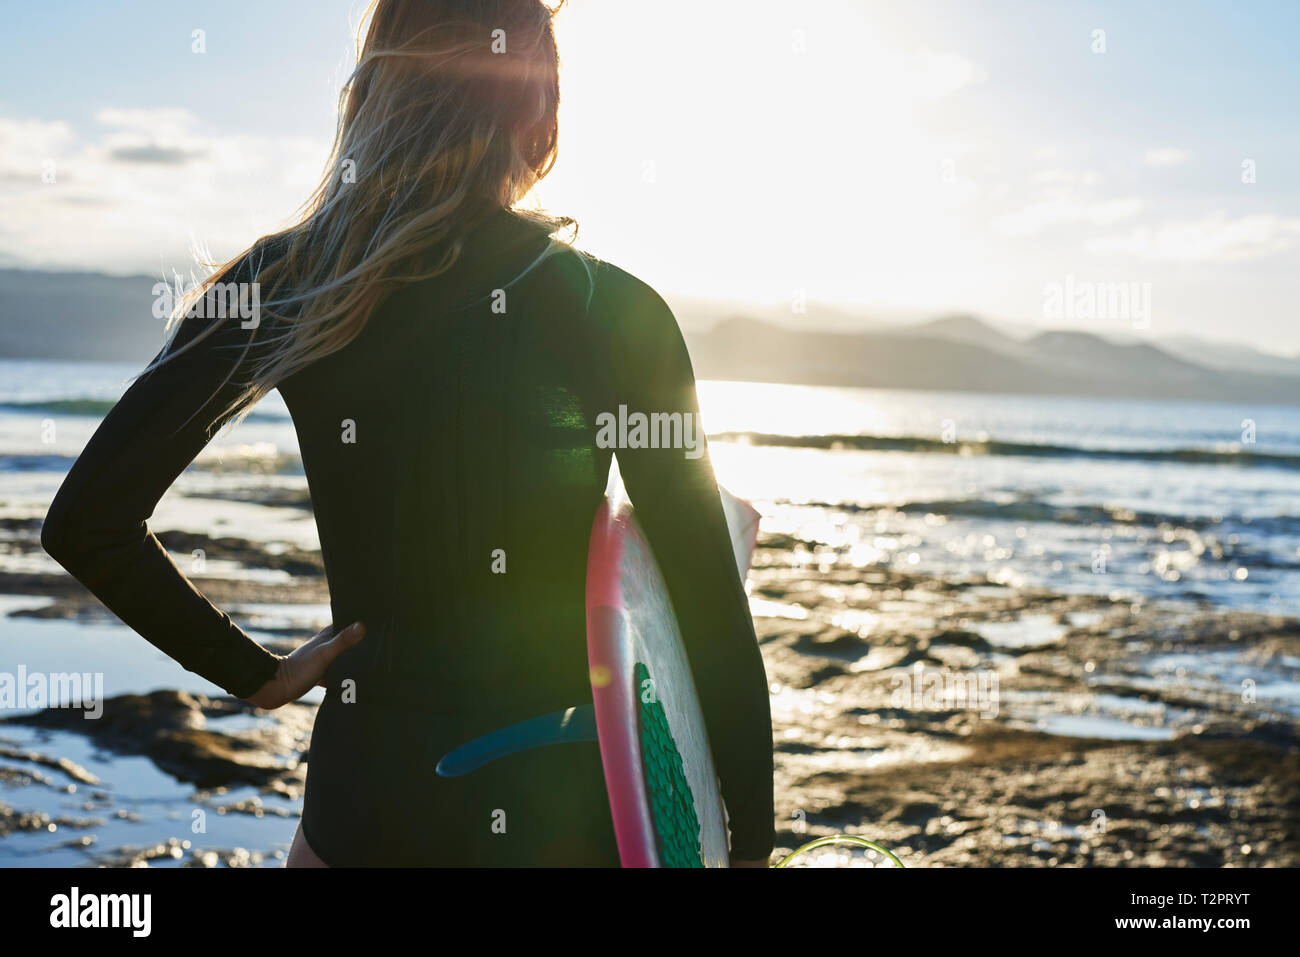 Surfer with surfboard on beach Stock Photo